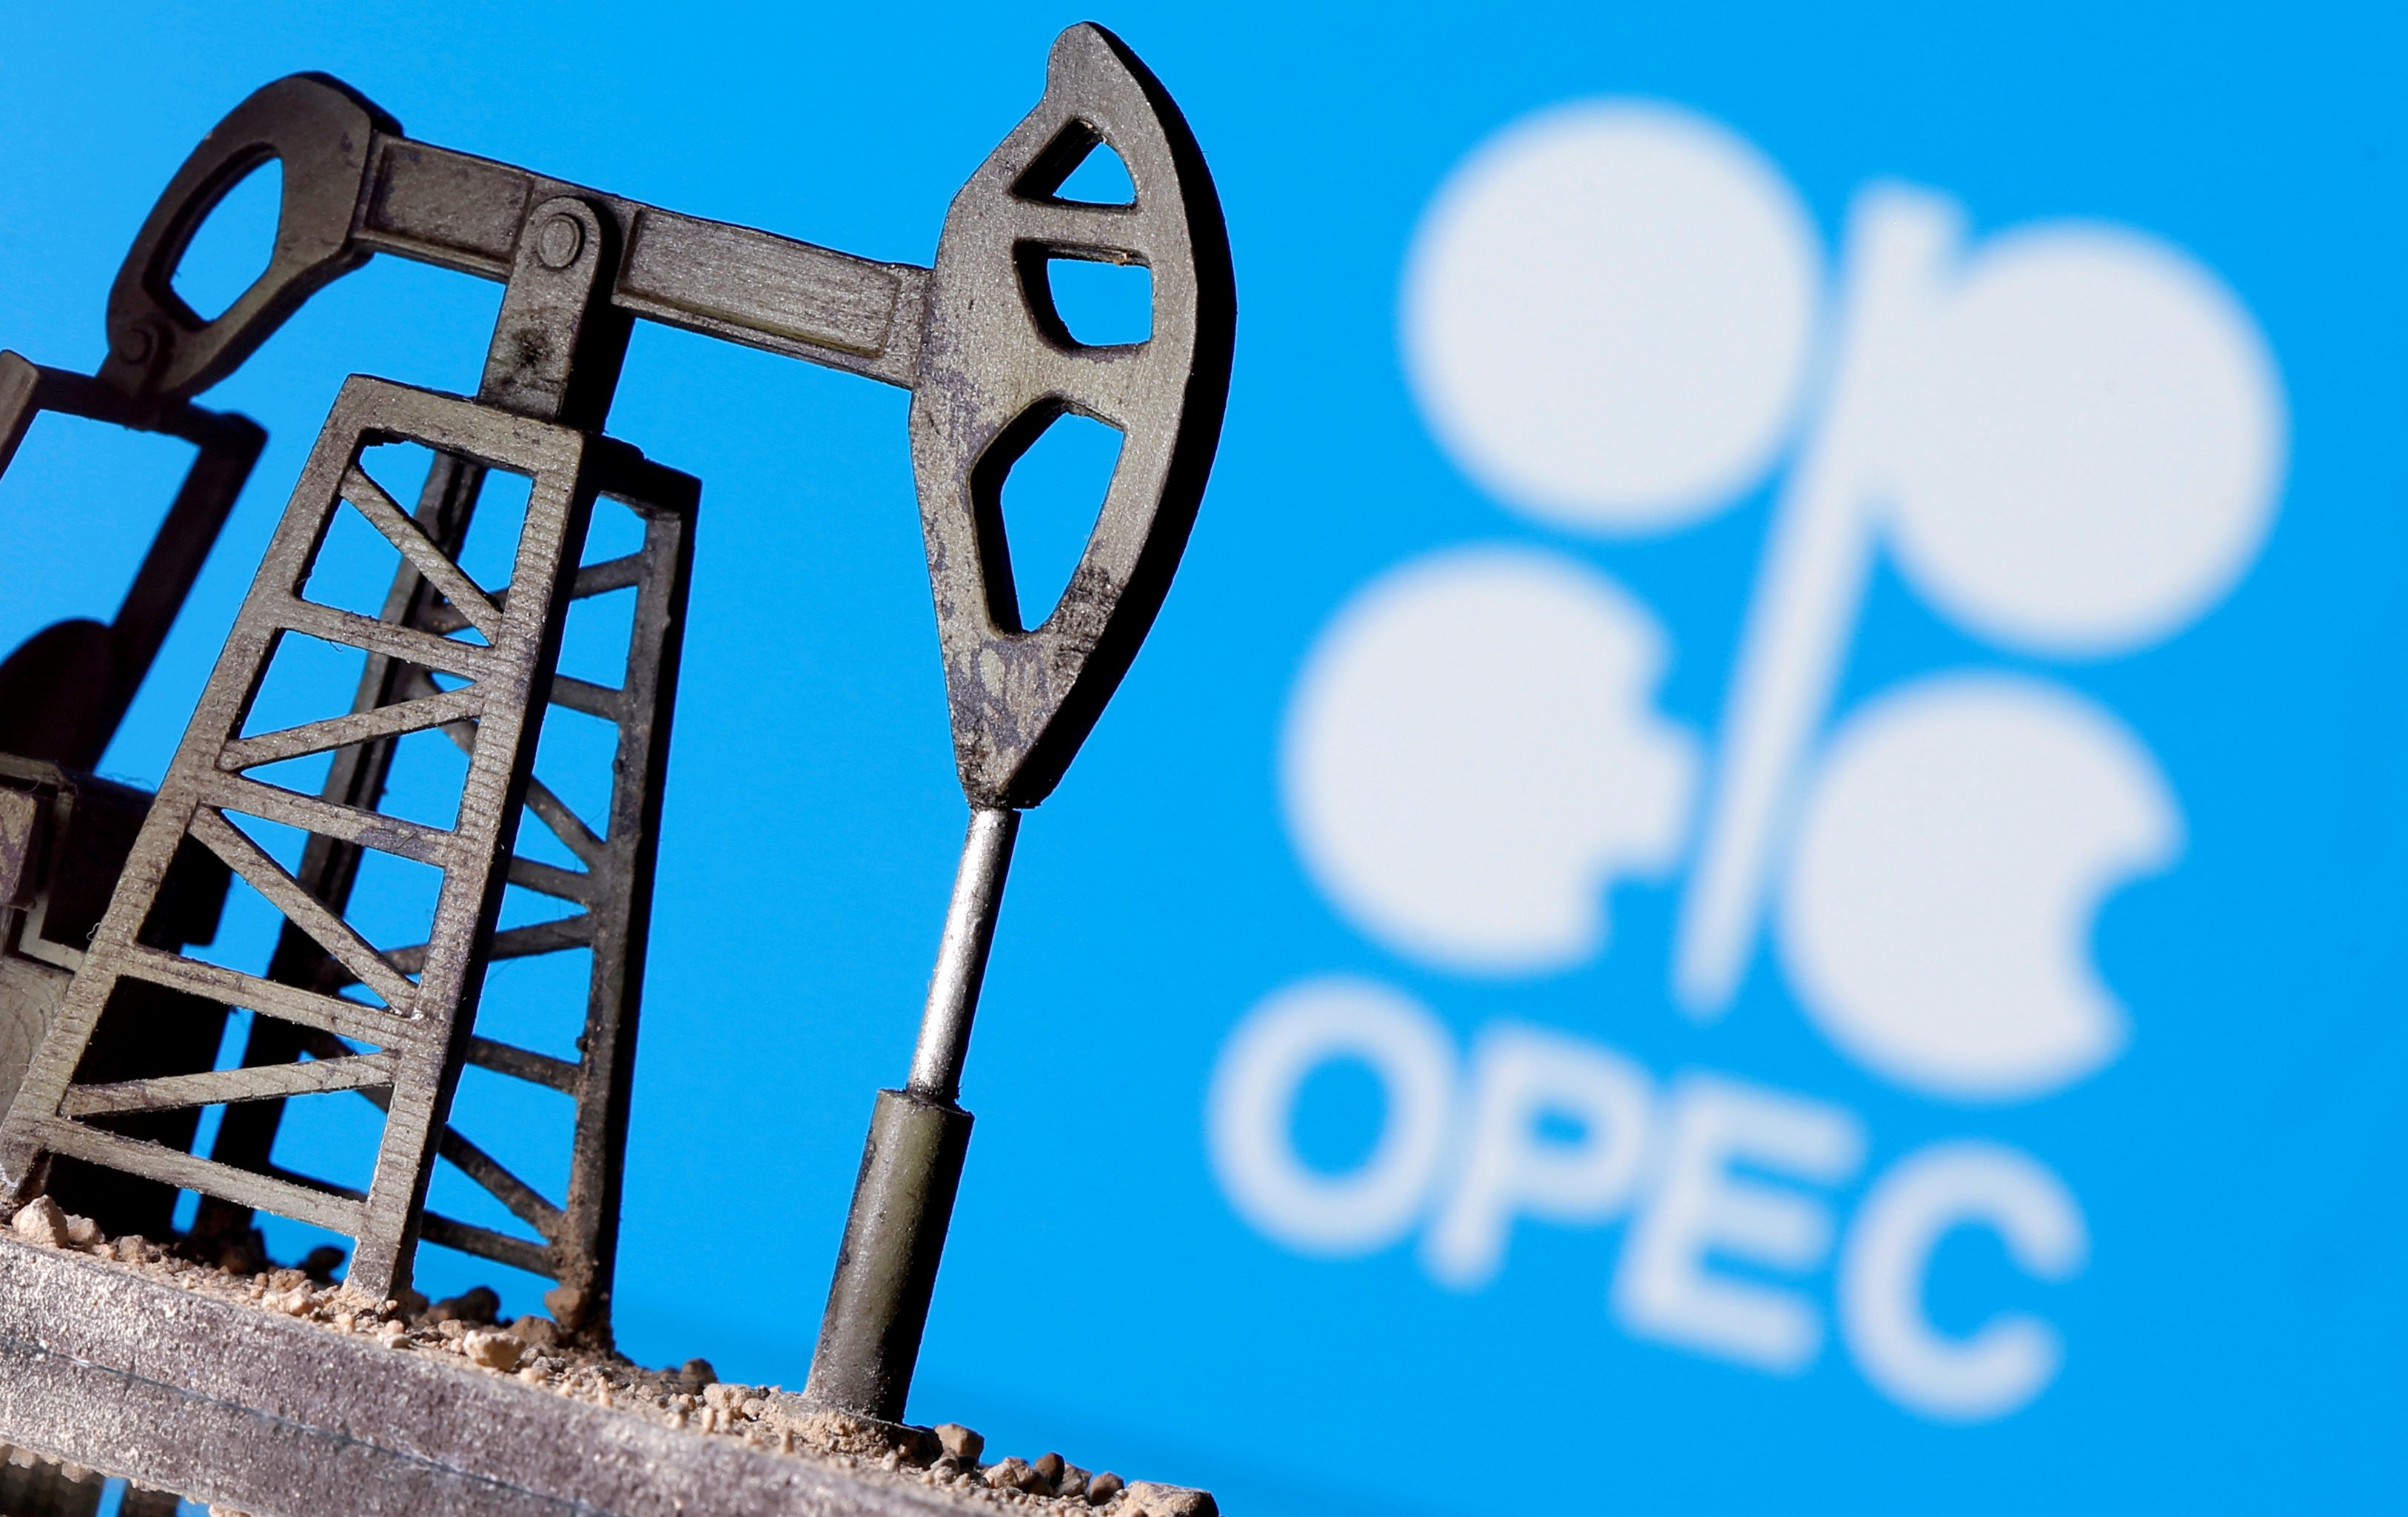 OPEC, Russia seen gaining from climate activist wins